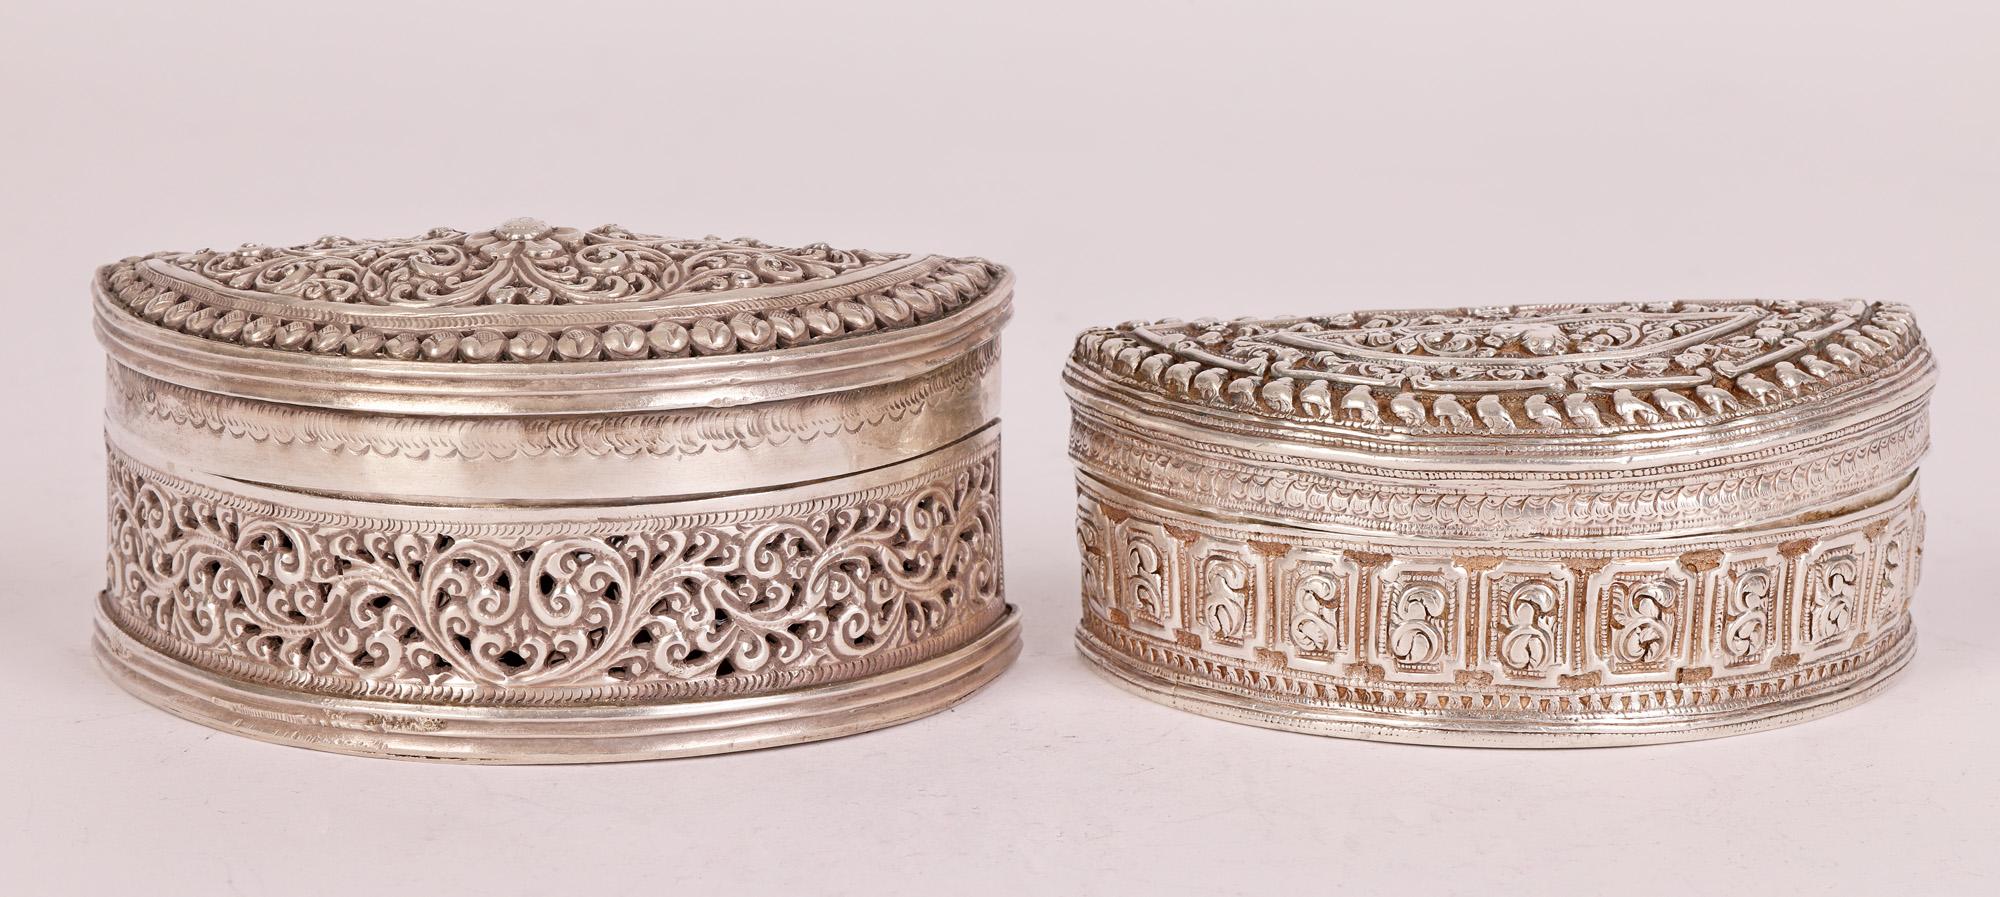 Two antique Burmese silver Betel boxes of half moon shape one with a pierced scroll leaf design and the other with embossed patterning with a small lion dog to the cover dating from the 19th or early 20th Century.

The boxes were used to hold and